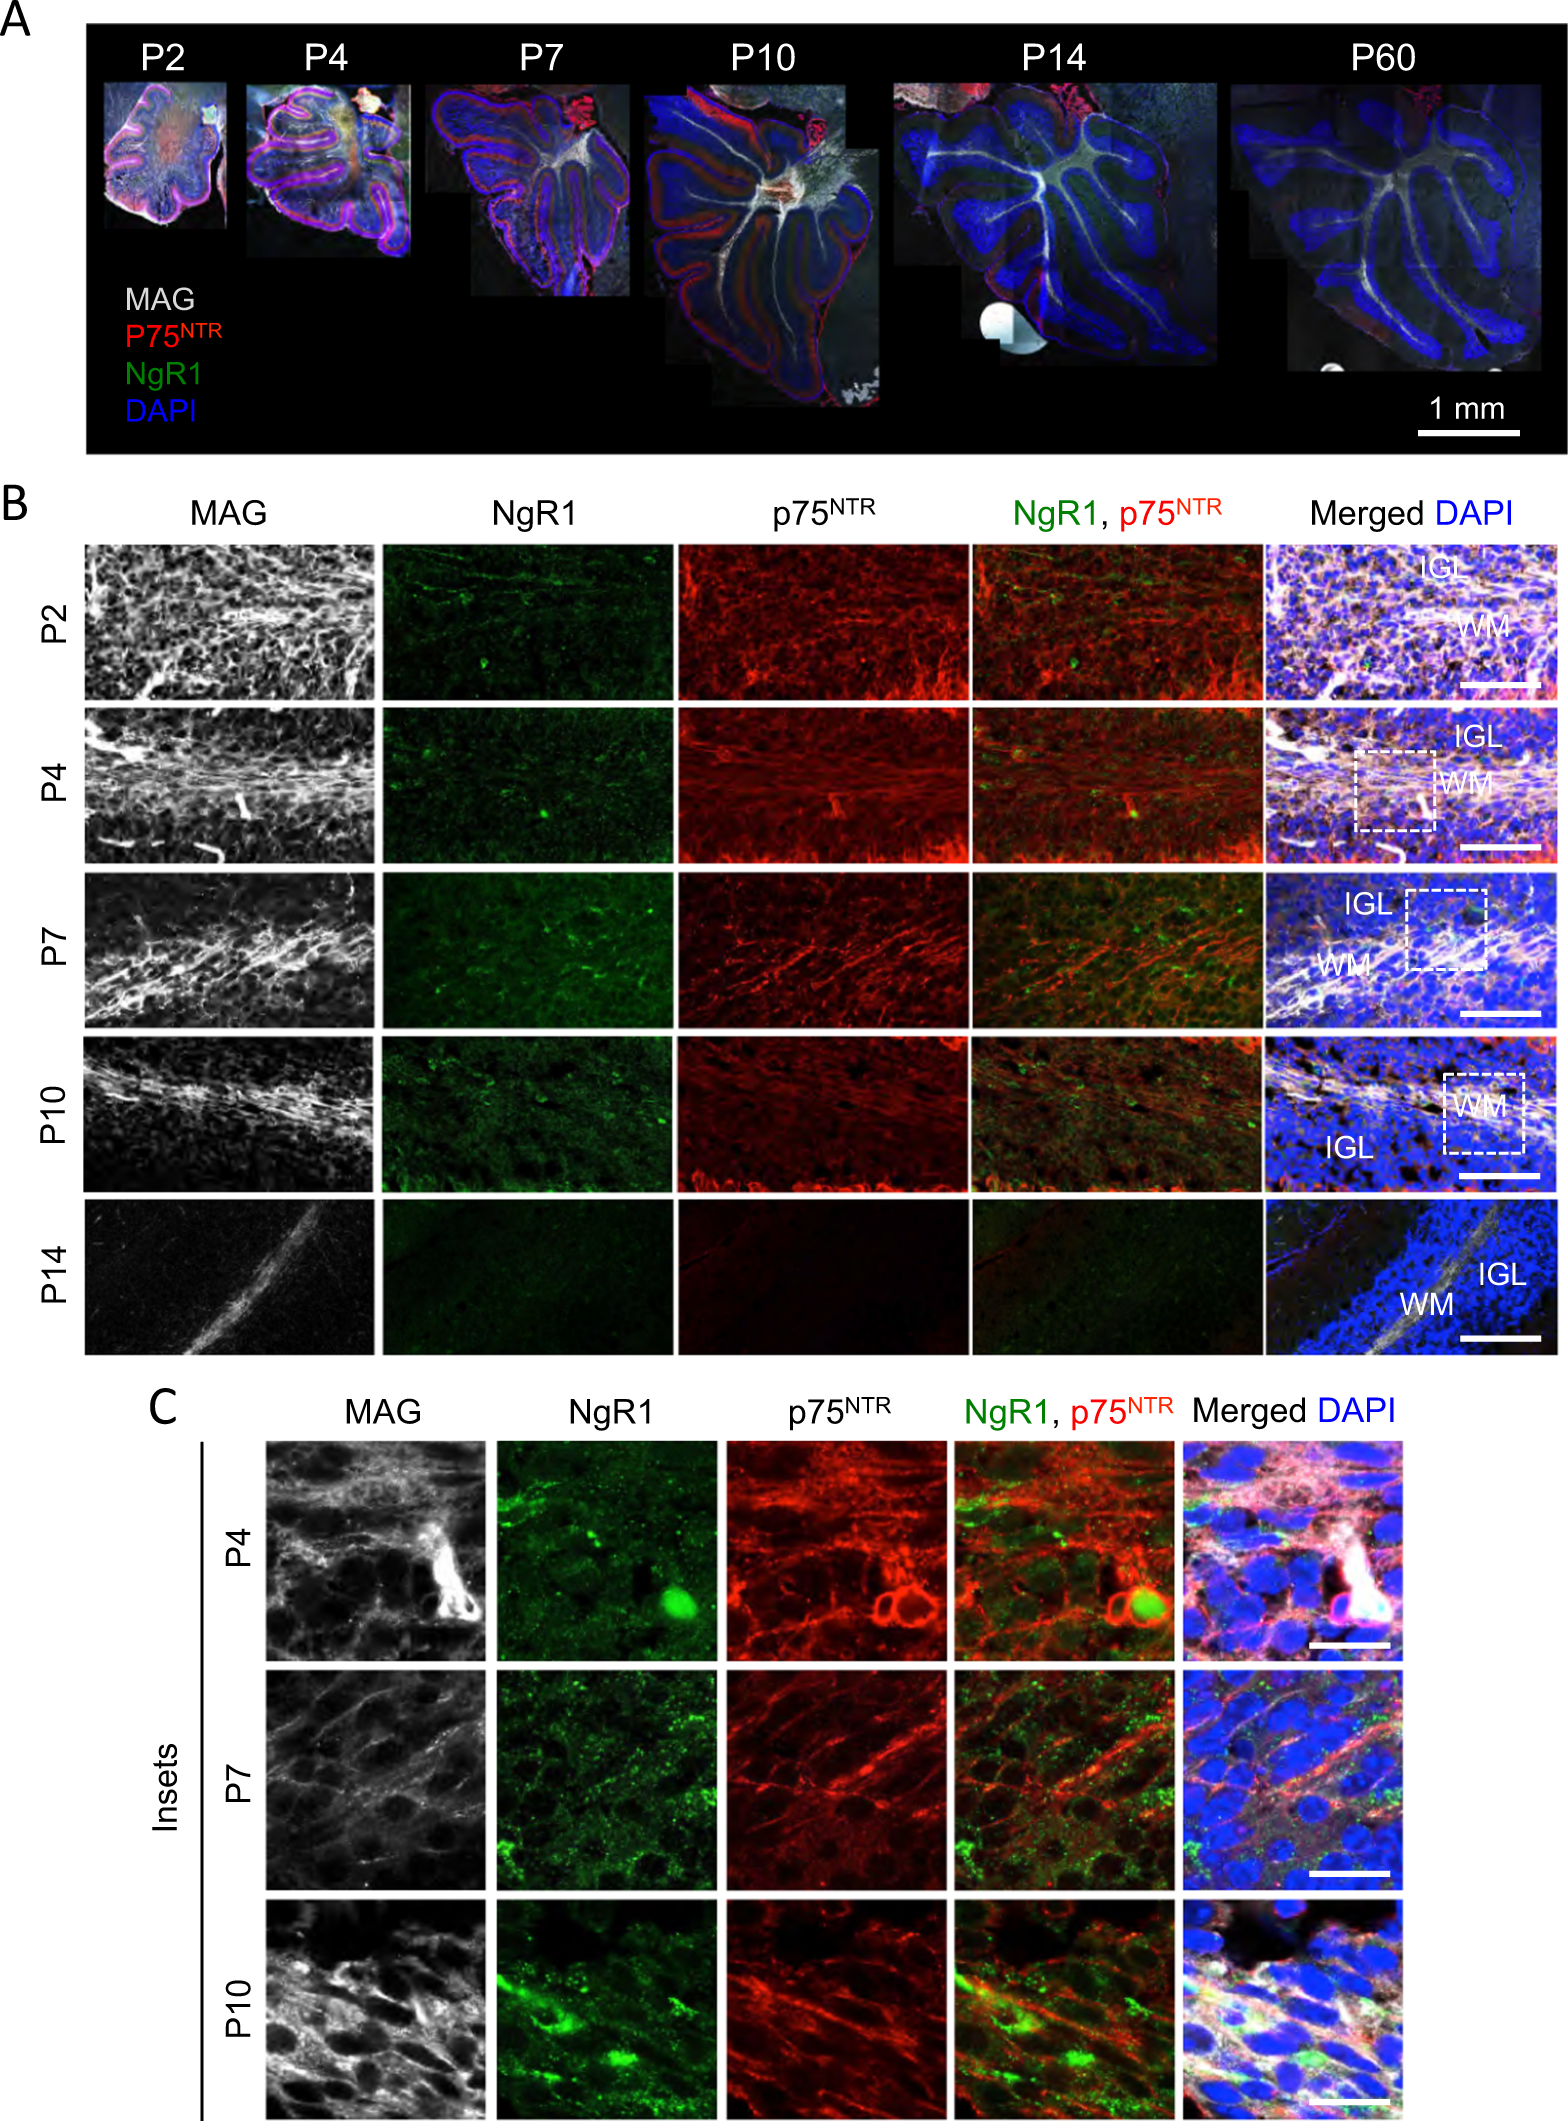 MAG induces apoptosis in cerebellar granule neurons through p75NTR  demarcating granule layer/white matter boundary | Cell Death & Disease